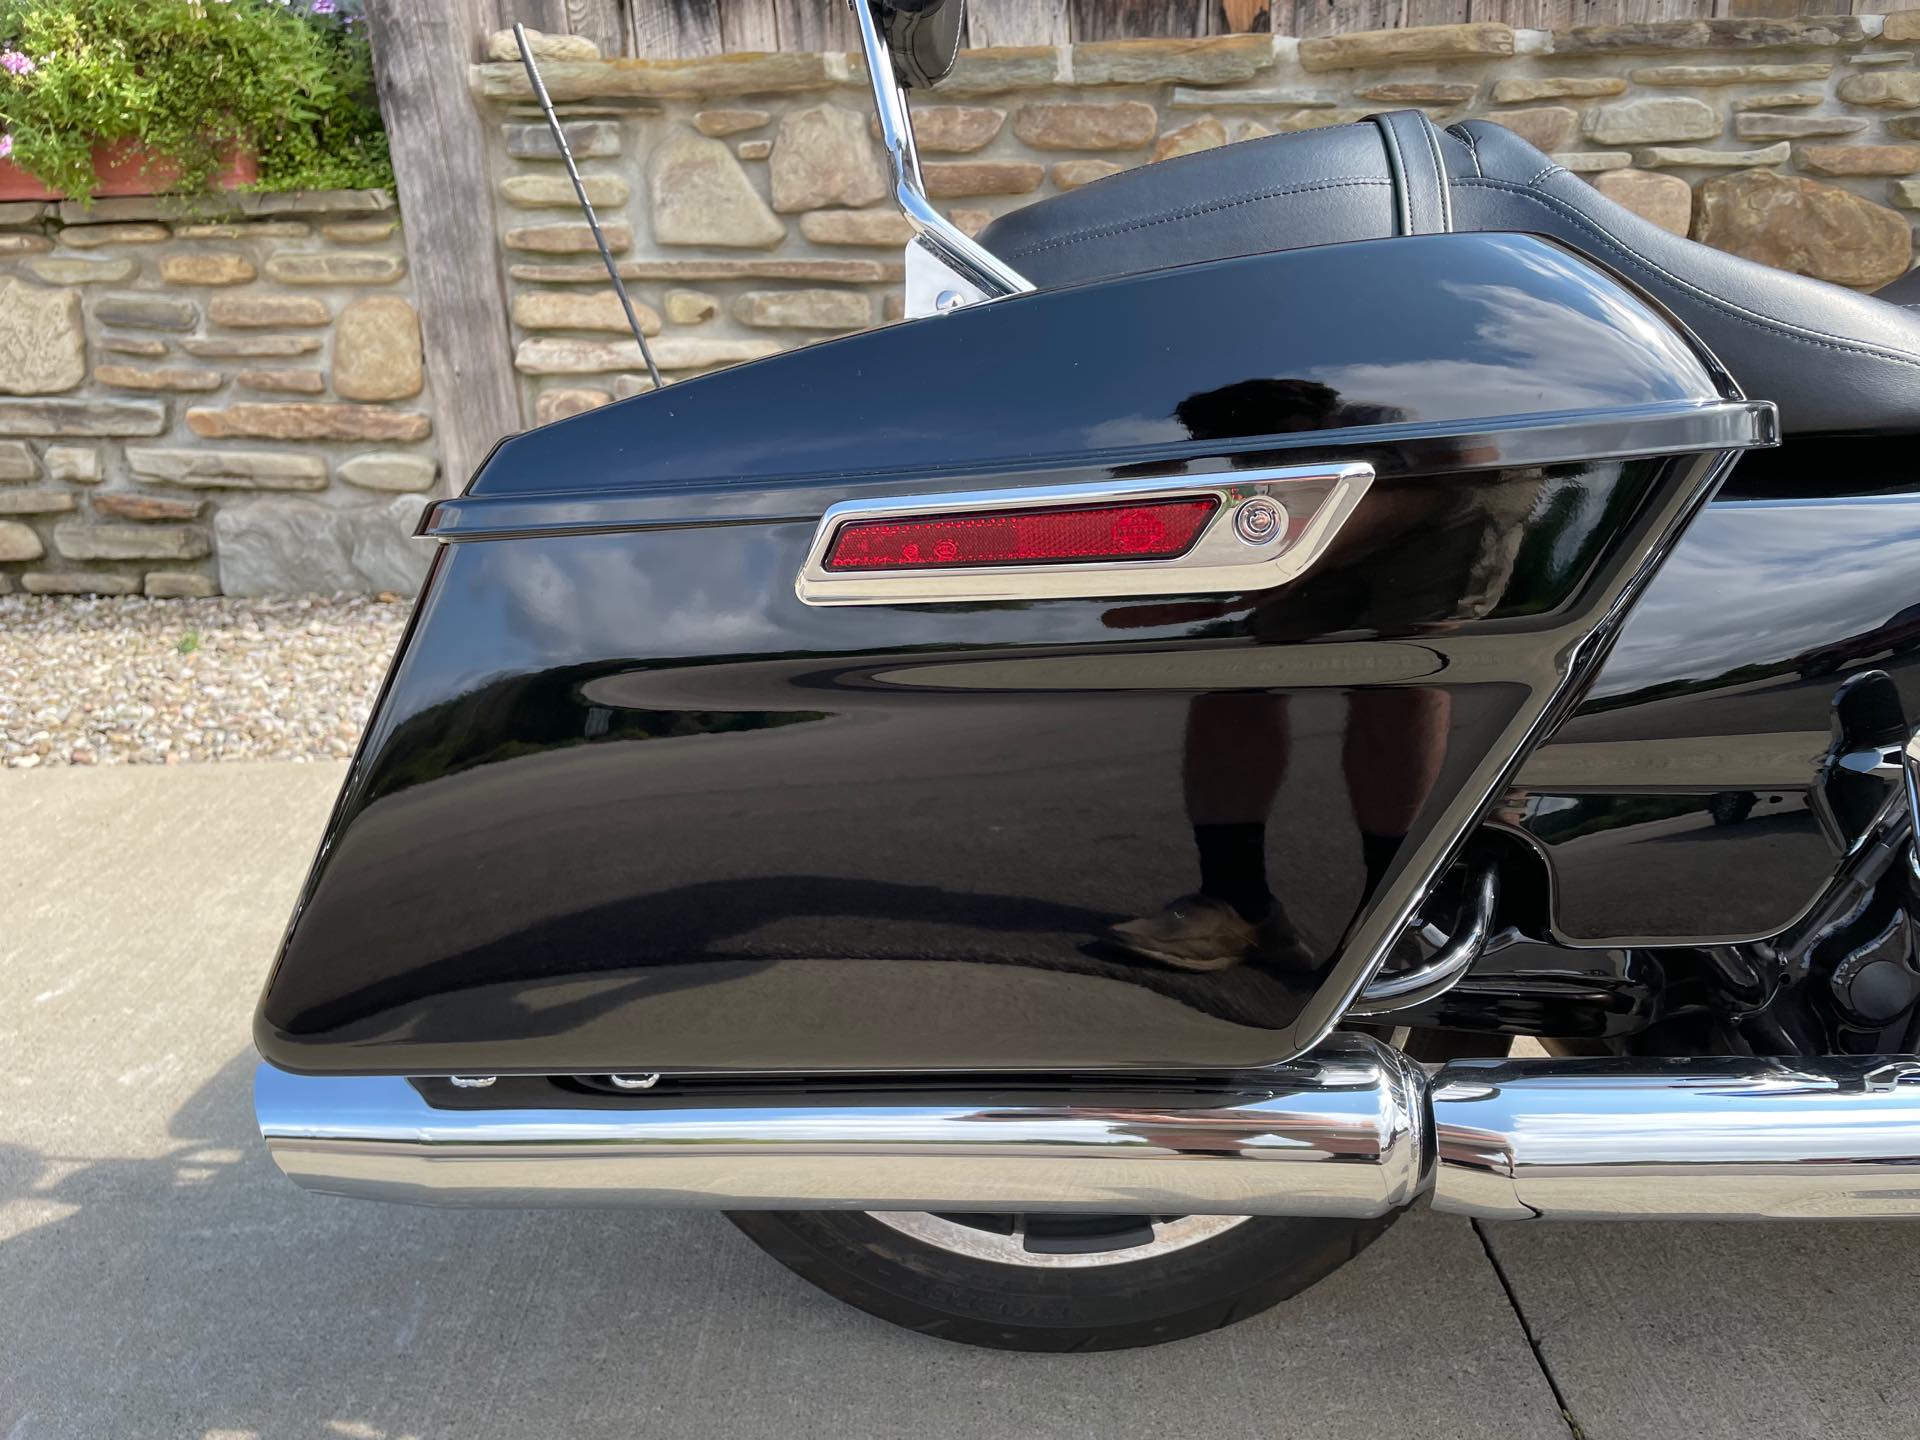 2020 Harley-Davidson Touring Street Glide at Arkport Cycles